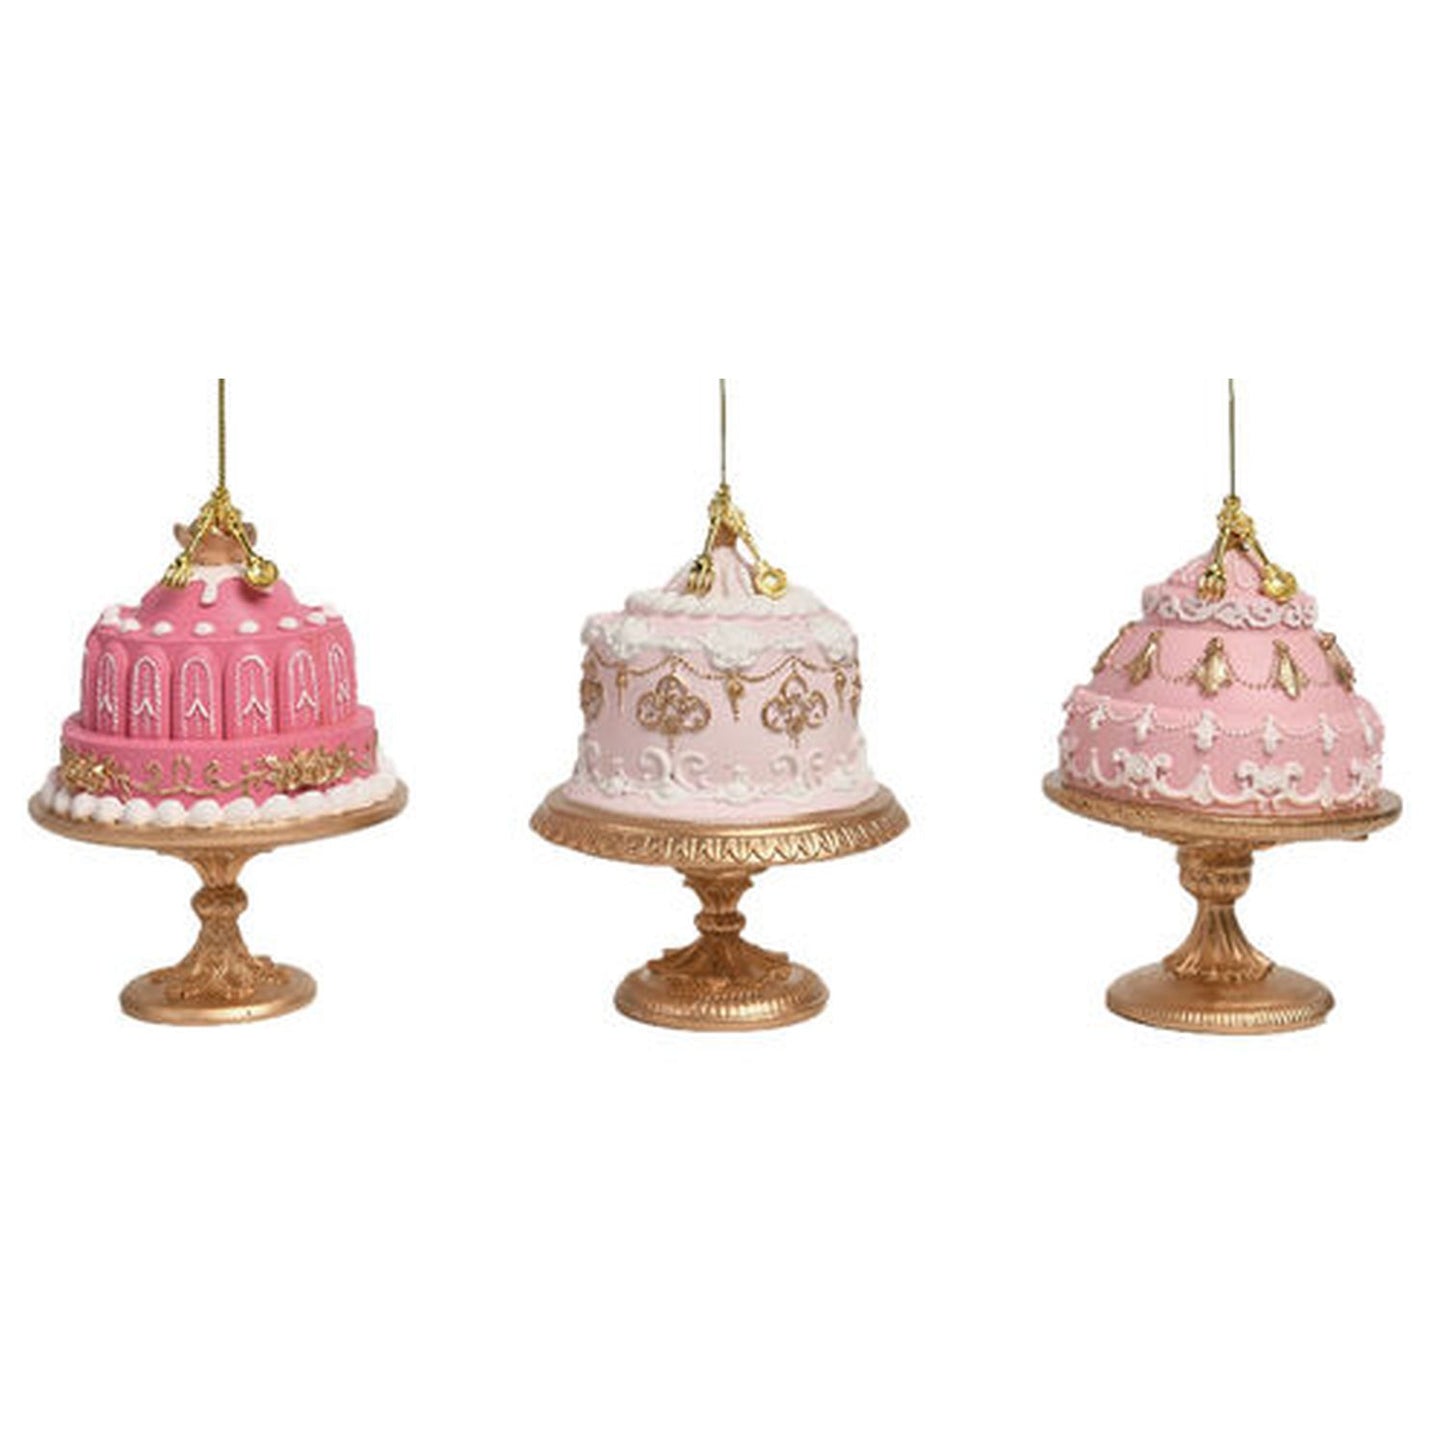 December Diamonds 3 Assorted Pink Cakes On Gold Base Ornaments, Multicolor